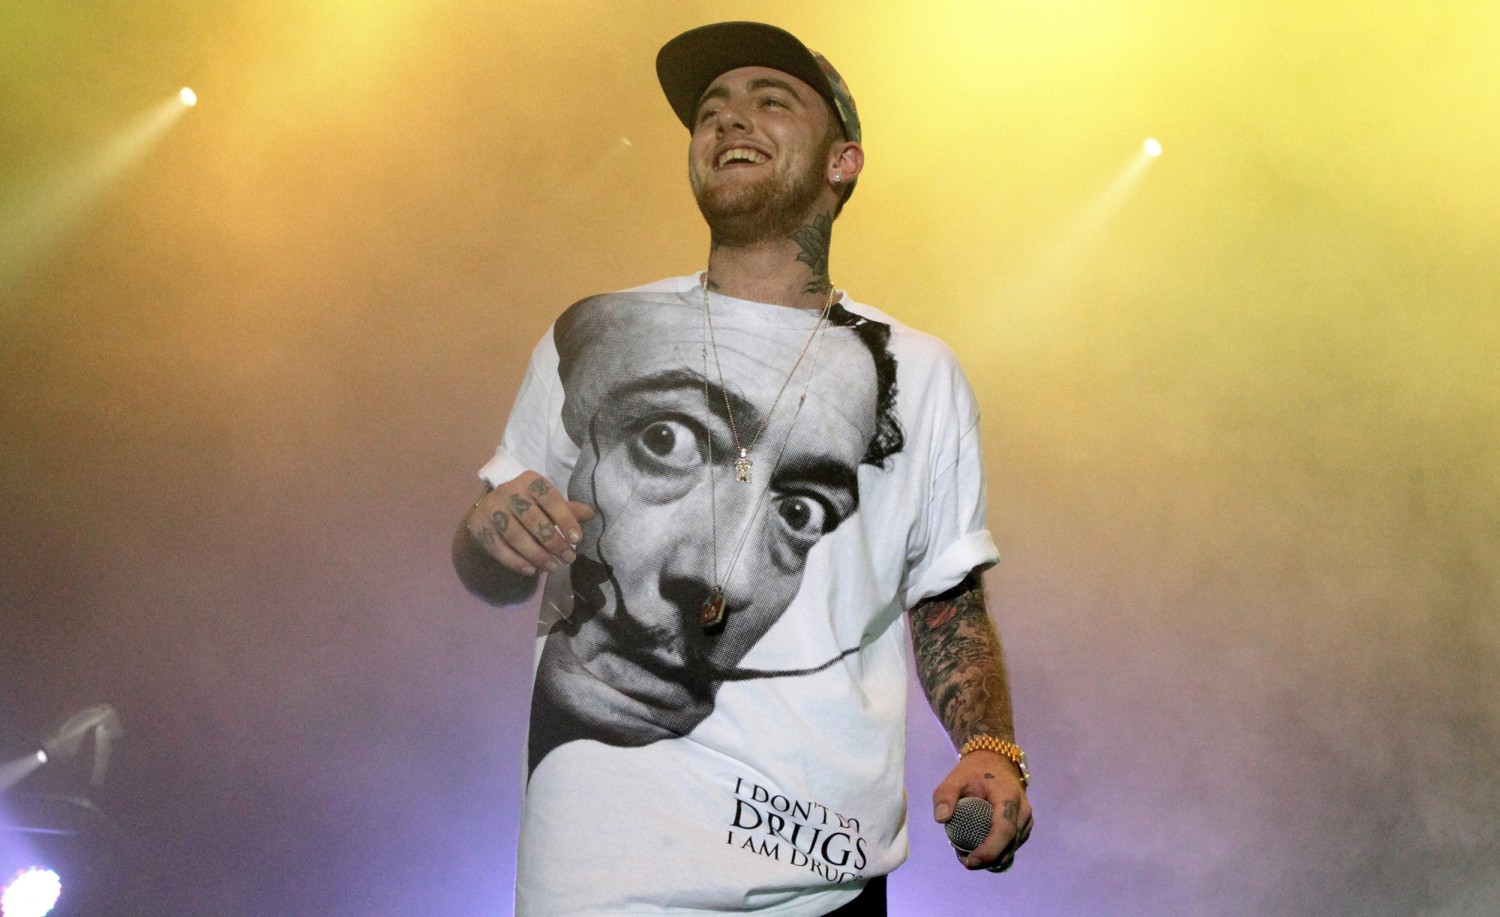 who called the abulance for mac miller